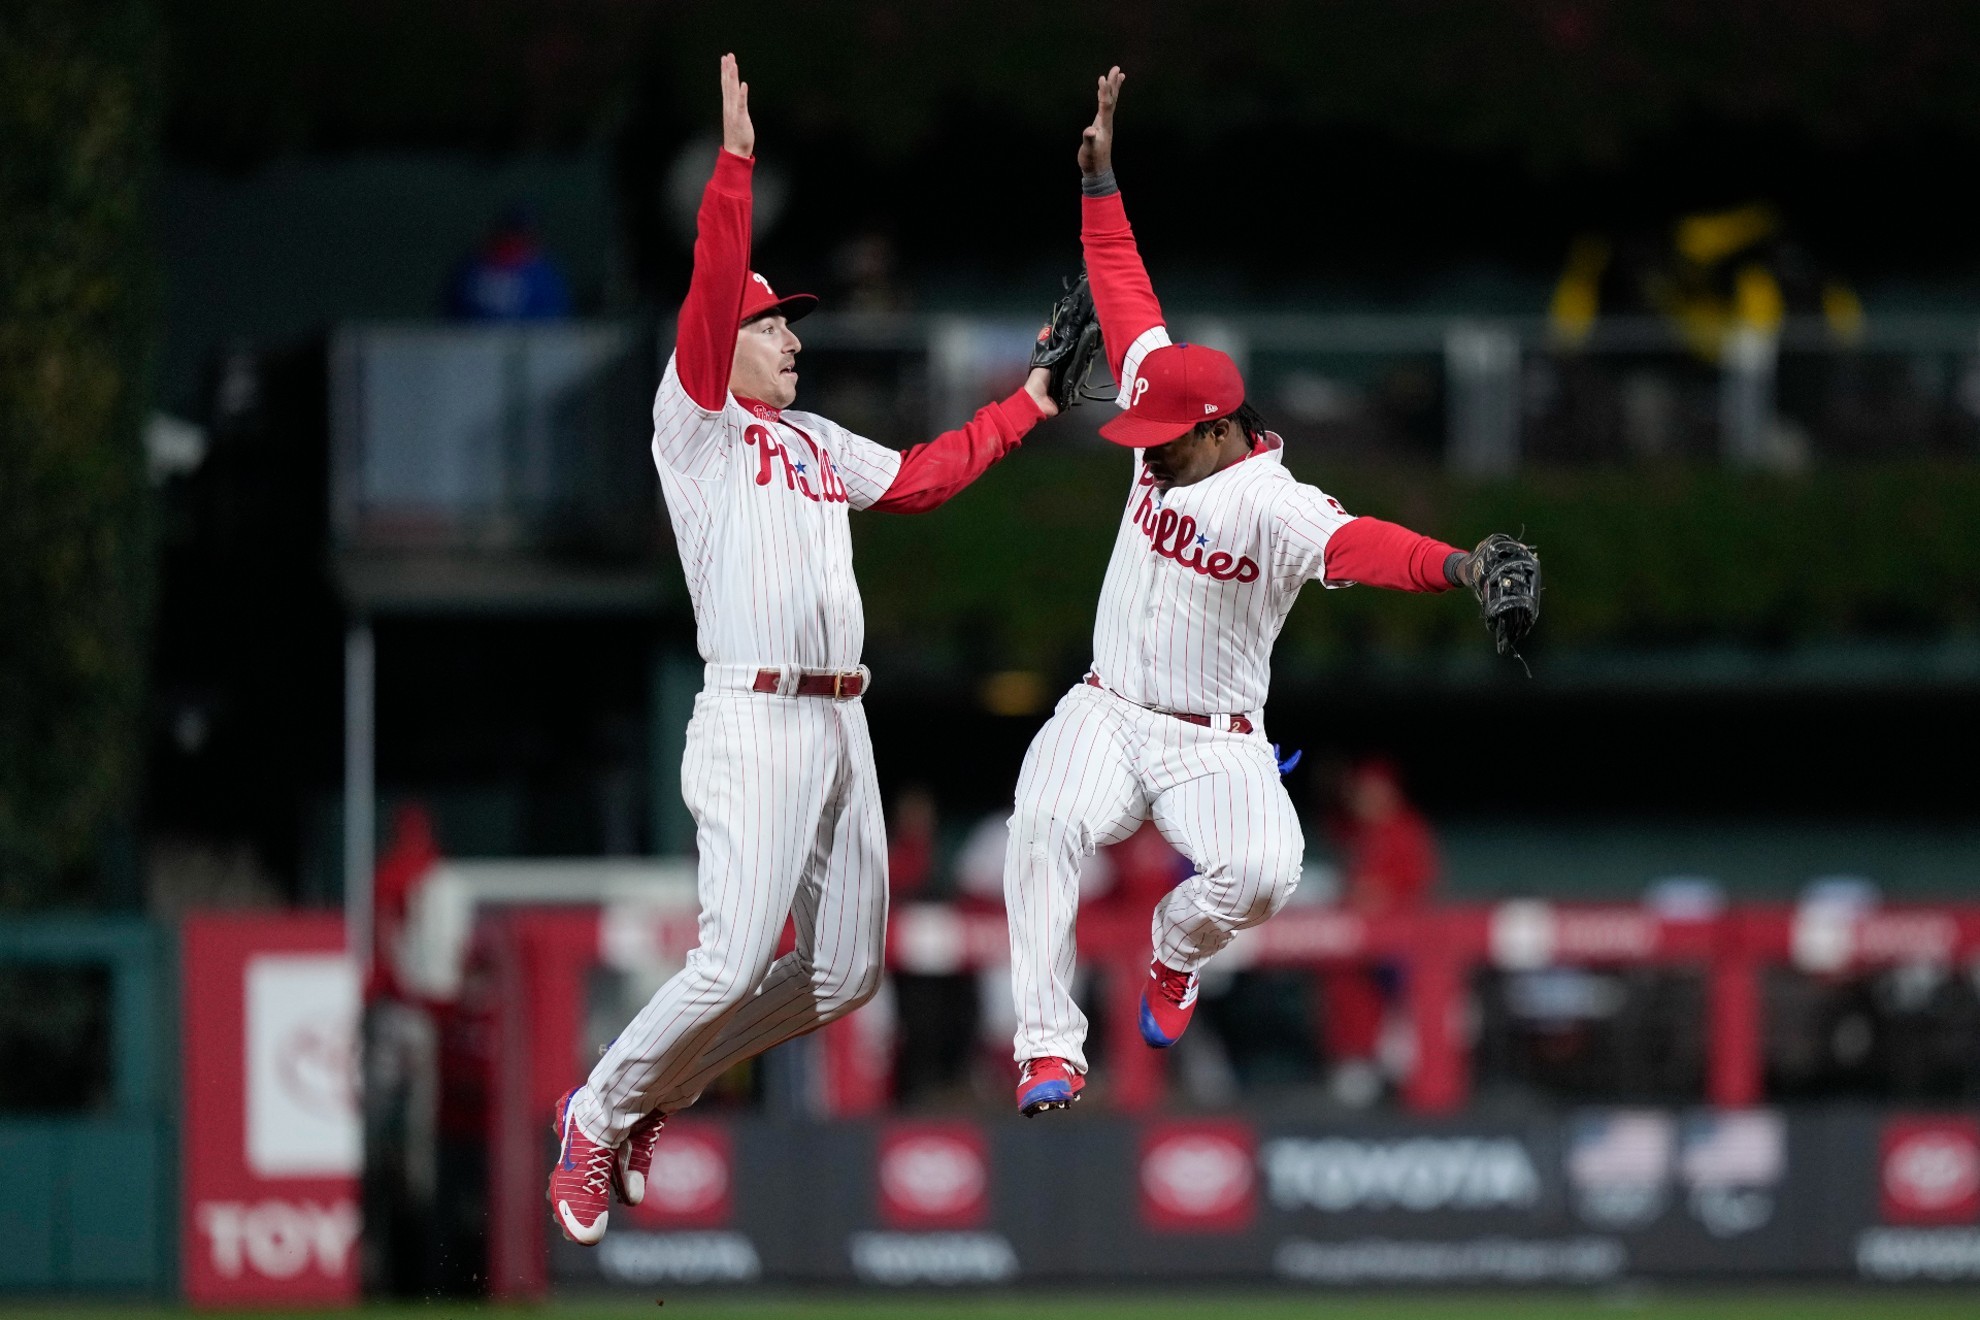 Phillies make historic comeback and are one win away from the World Series